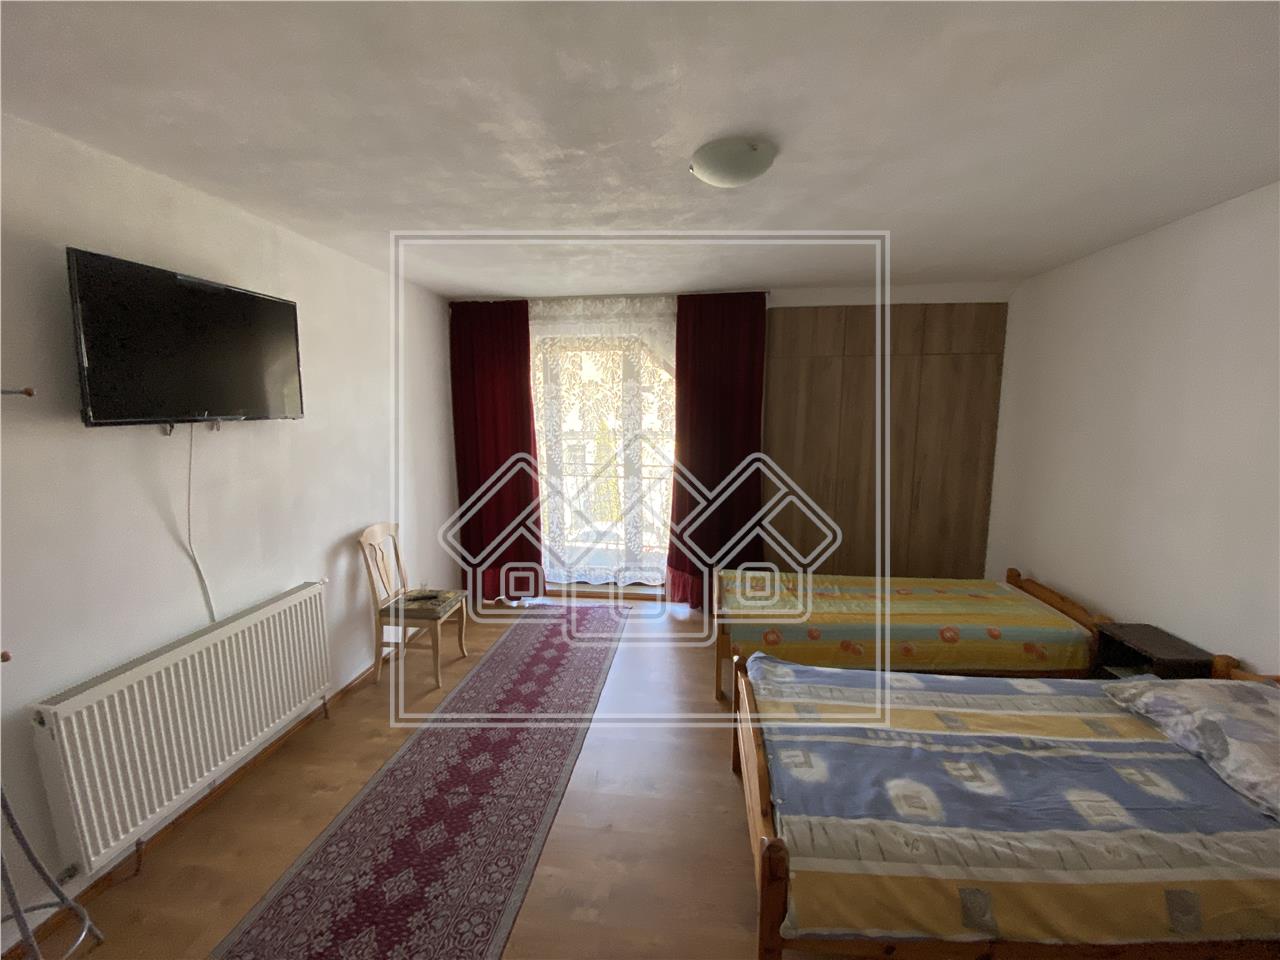 Pension for sale in Sibiu - 3 separate buildings - usable sqm